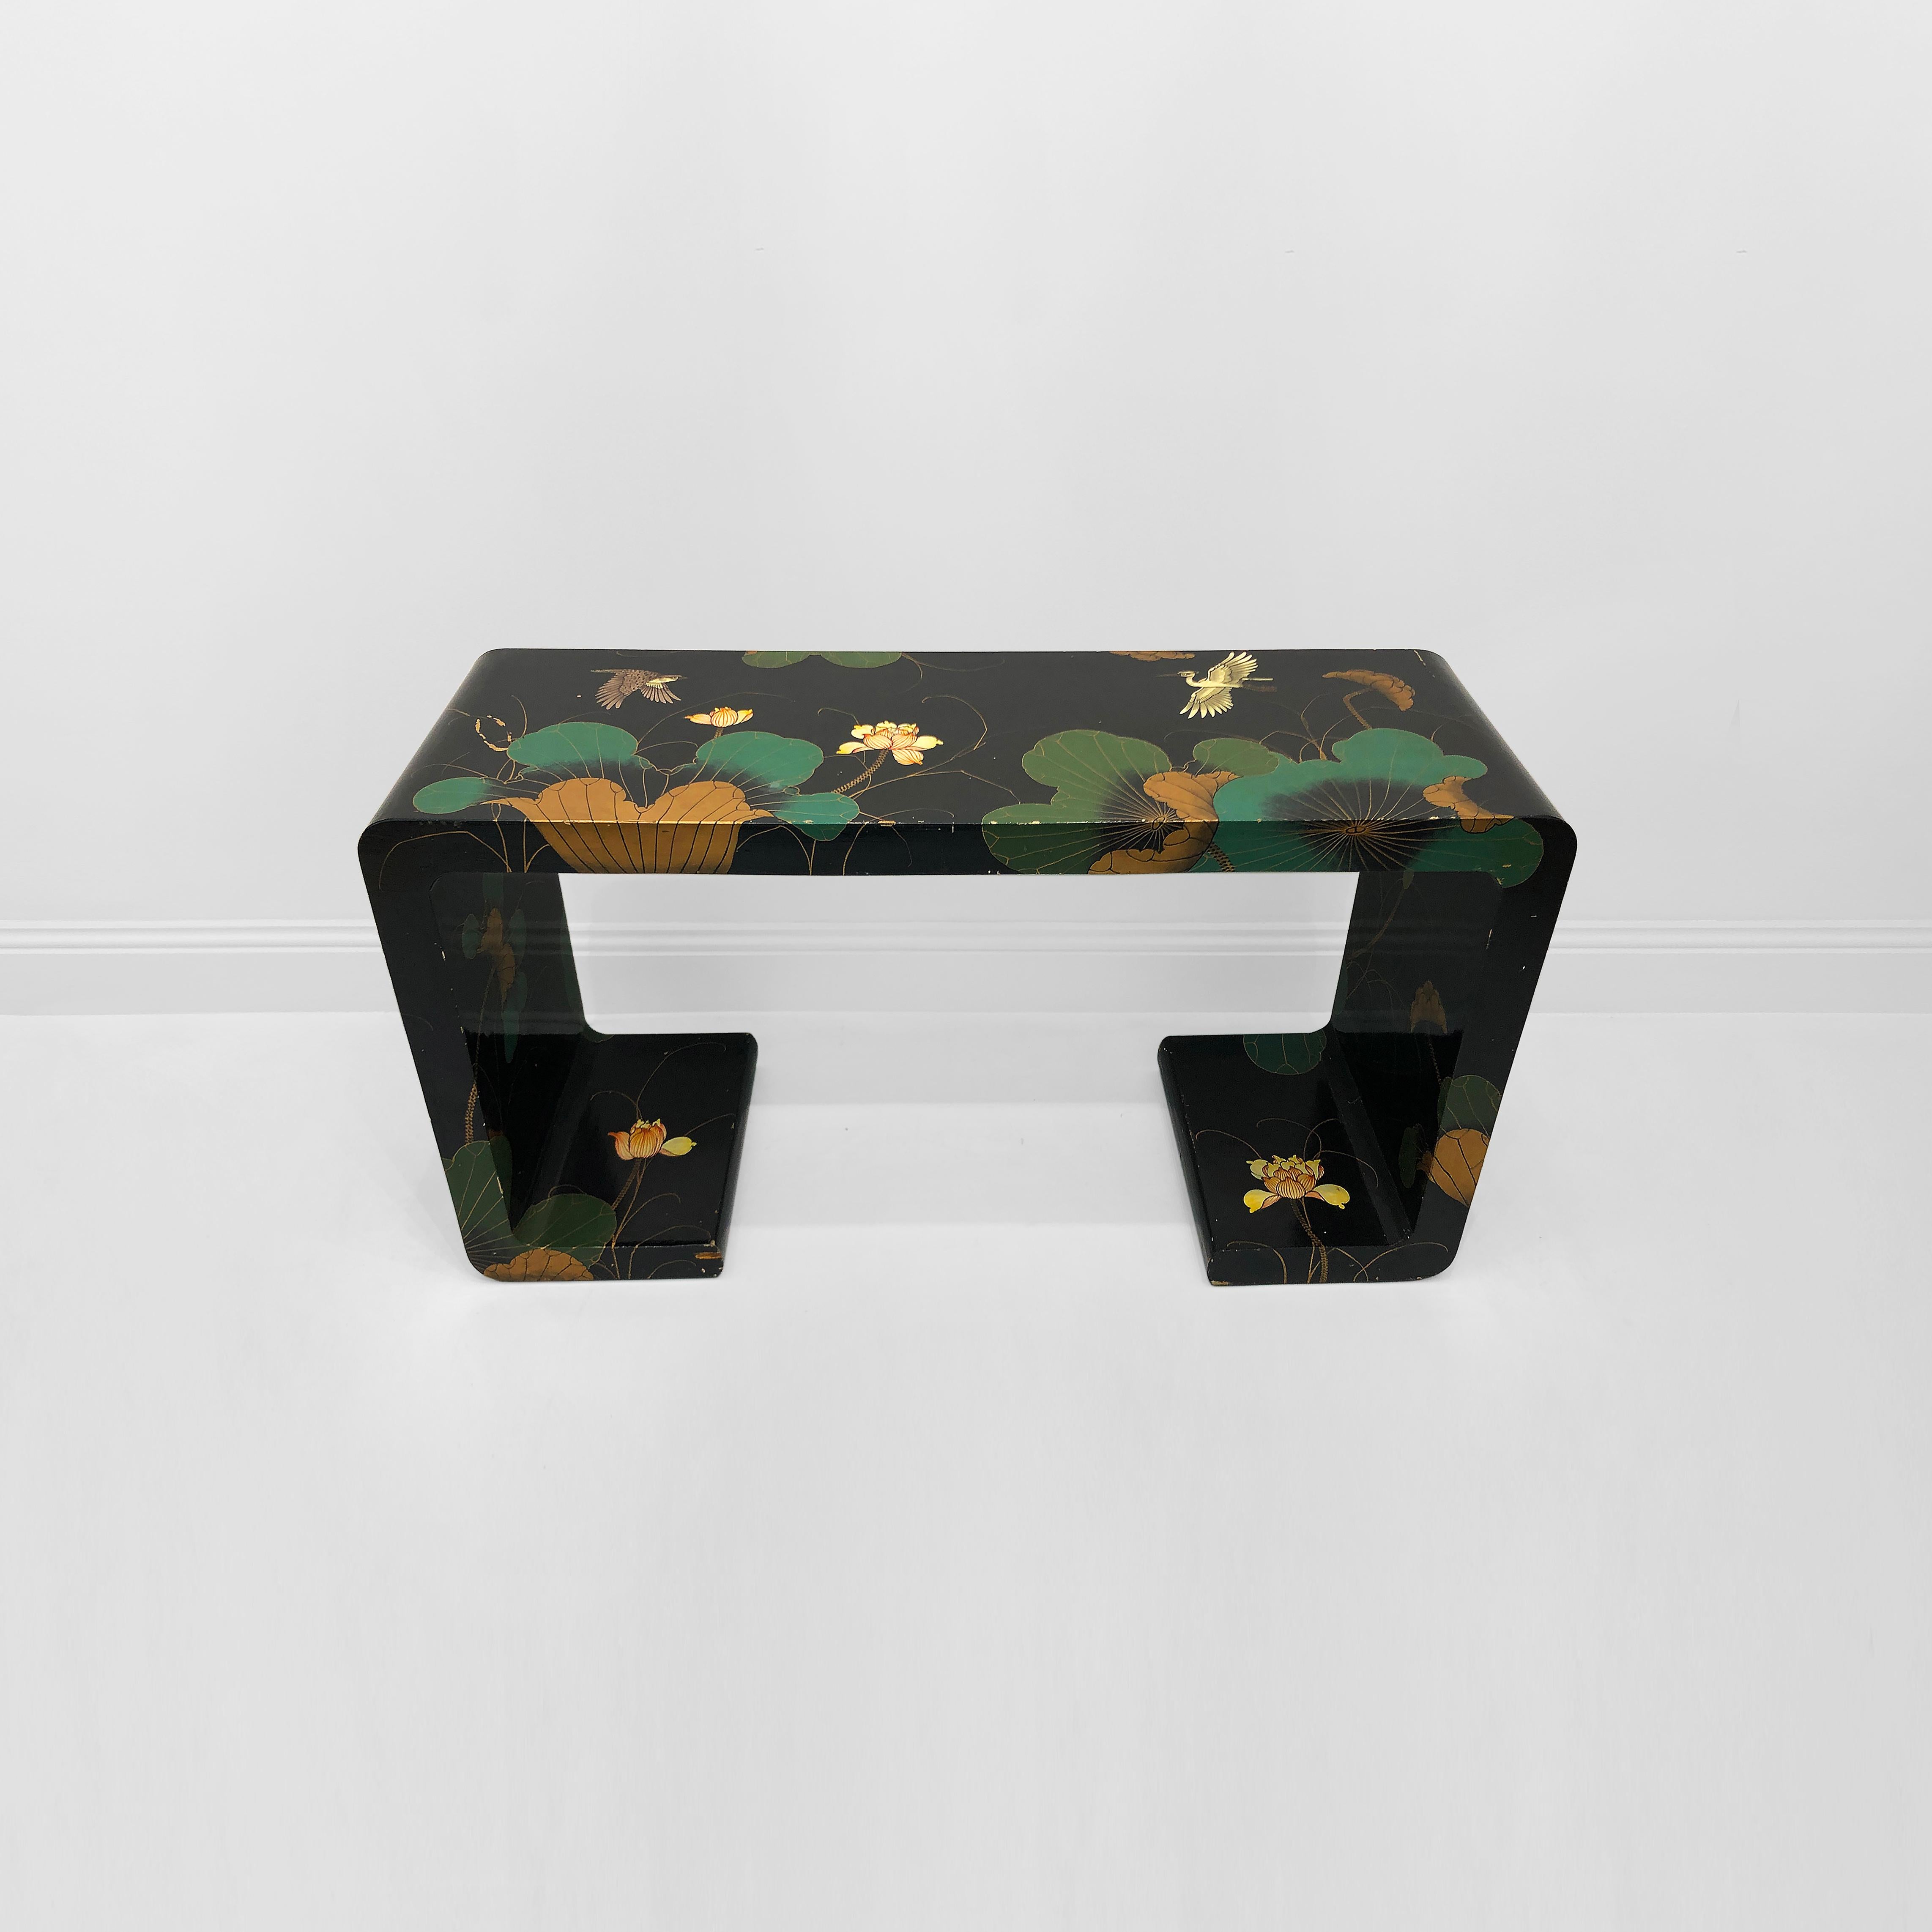 This 1970s Chinoiserie waterfall console table is a remarkable piece of furniture that exudes a blend of elegance and exotic charm. The console table has a sleek organic shape with waterfall sides and base. The black background has a striking